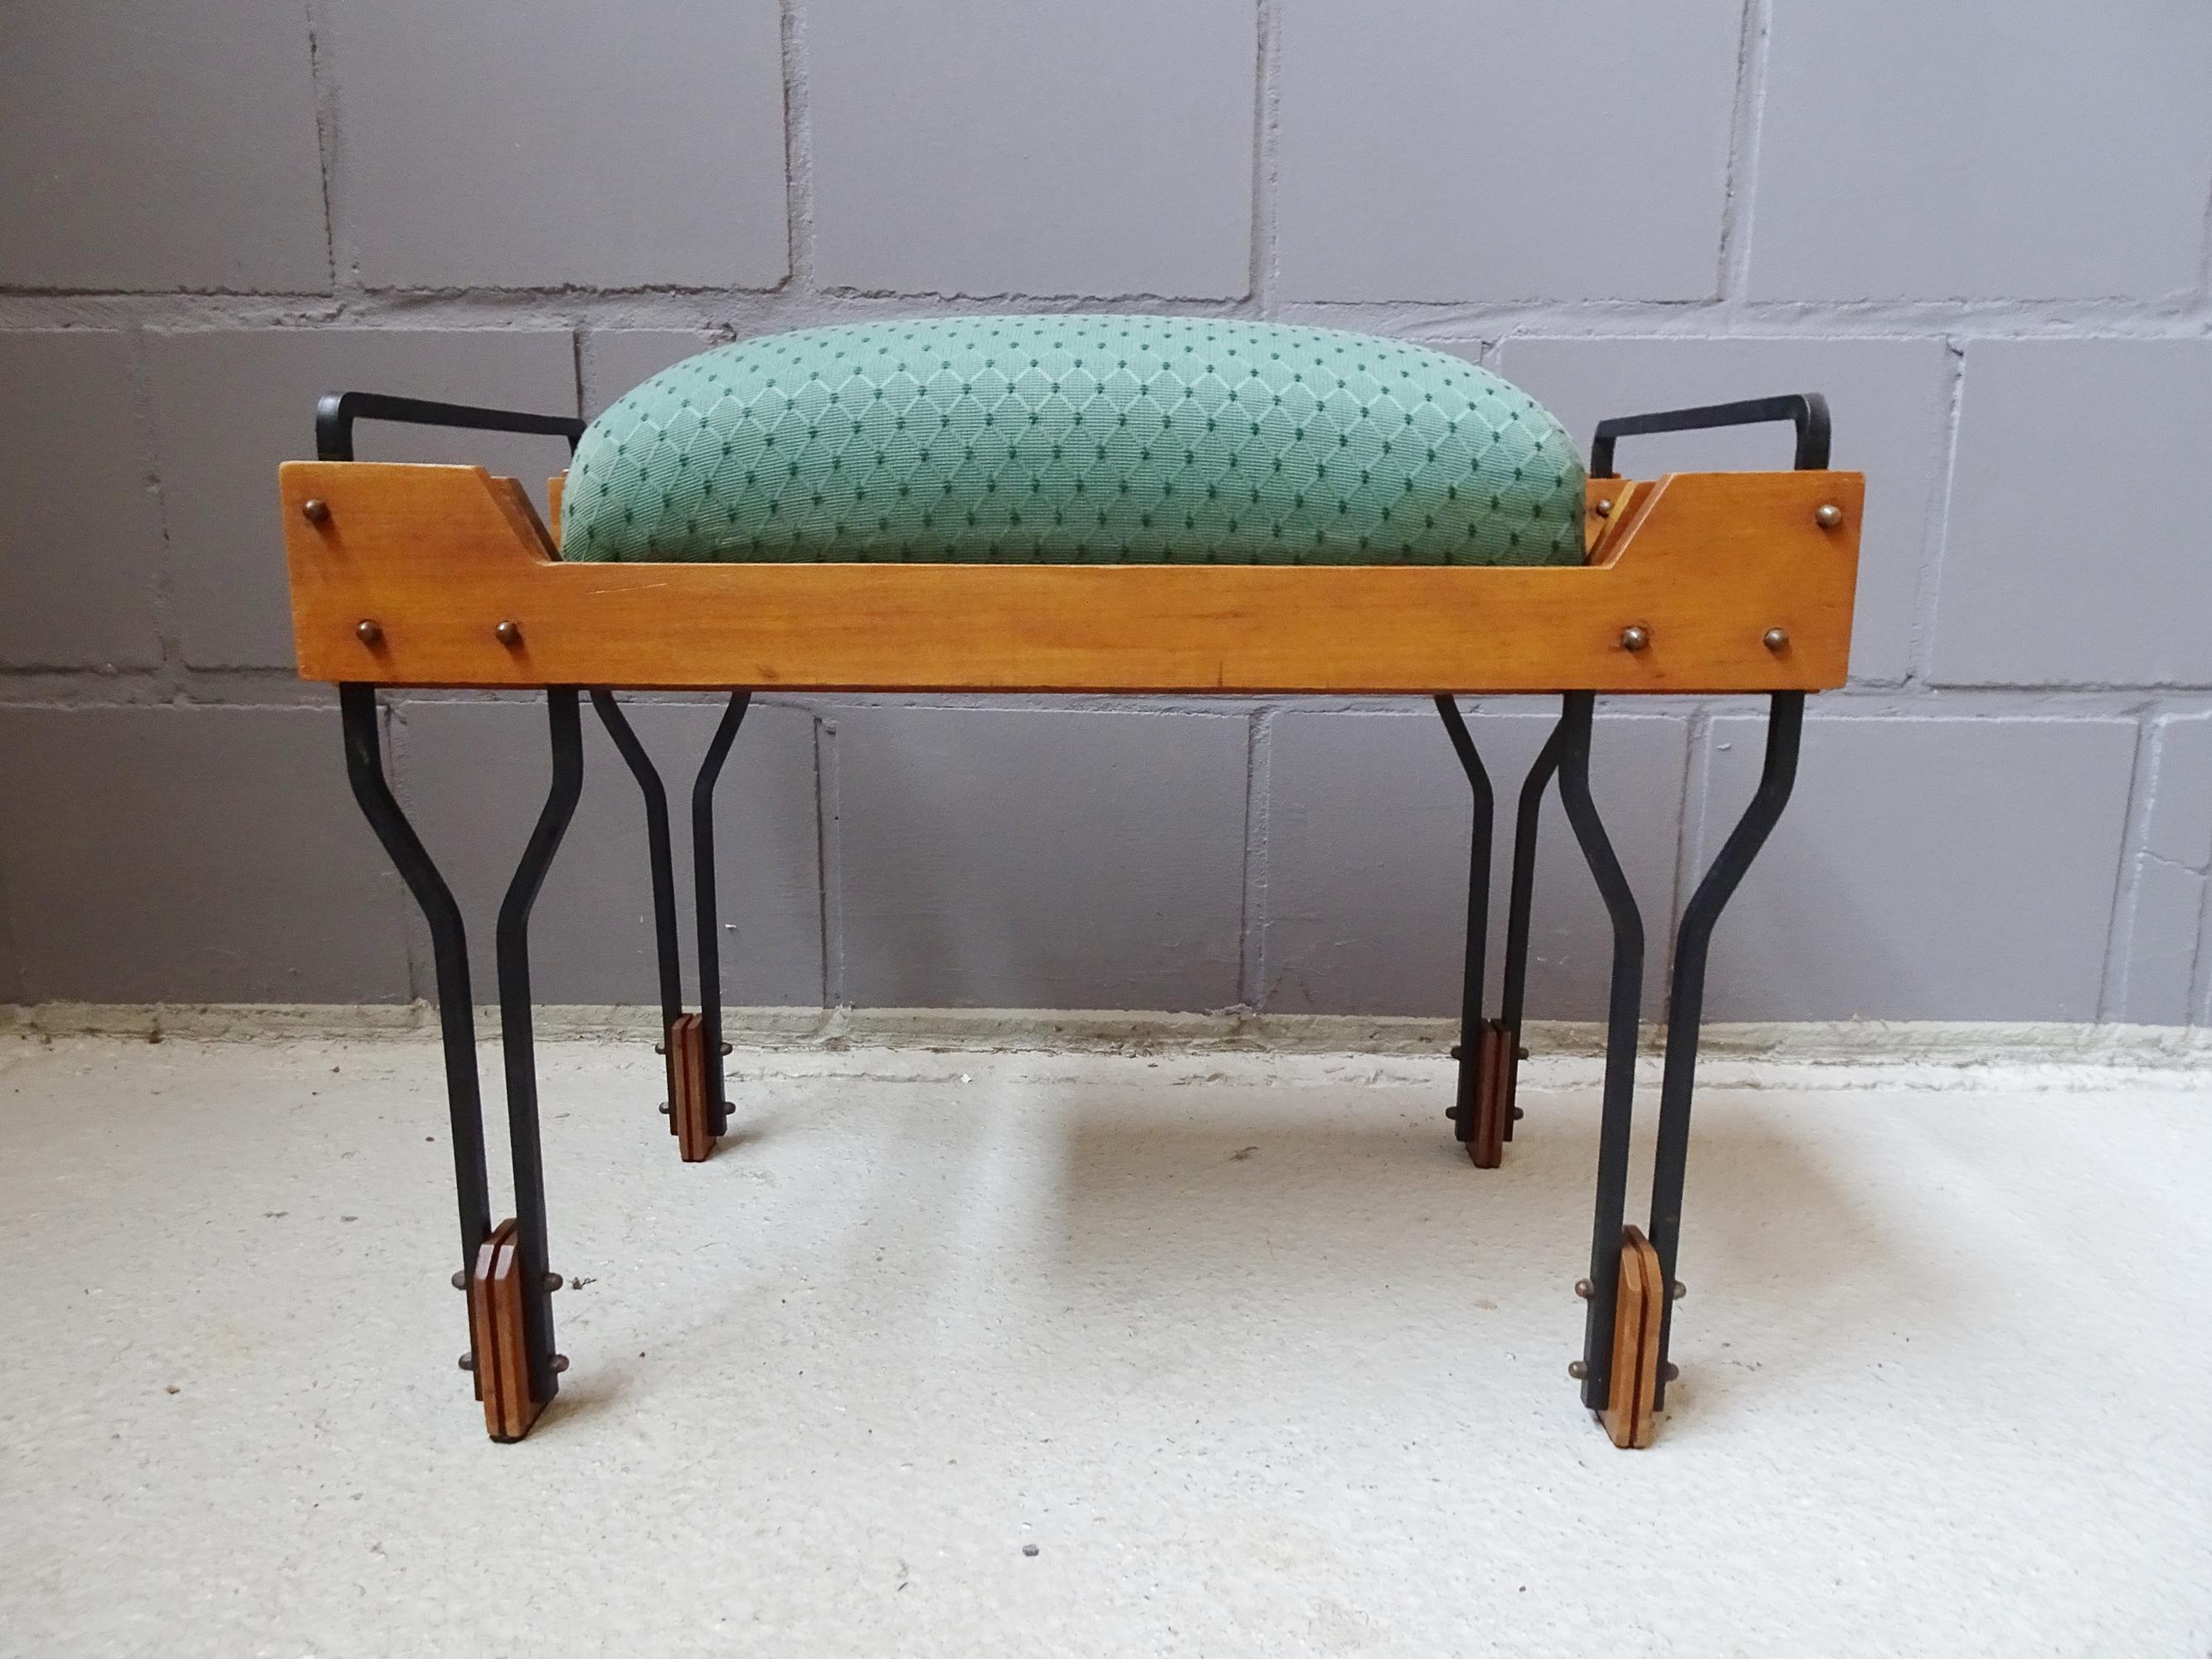 Modern Italian stool from the early 1950s. High quality and unusual design made of square iron with details made of wood and a green padded bench. The considerable size looks like a bench, yet restrained due to the narrow shape. Best Italian fabric